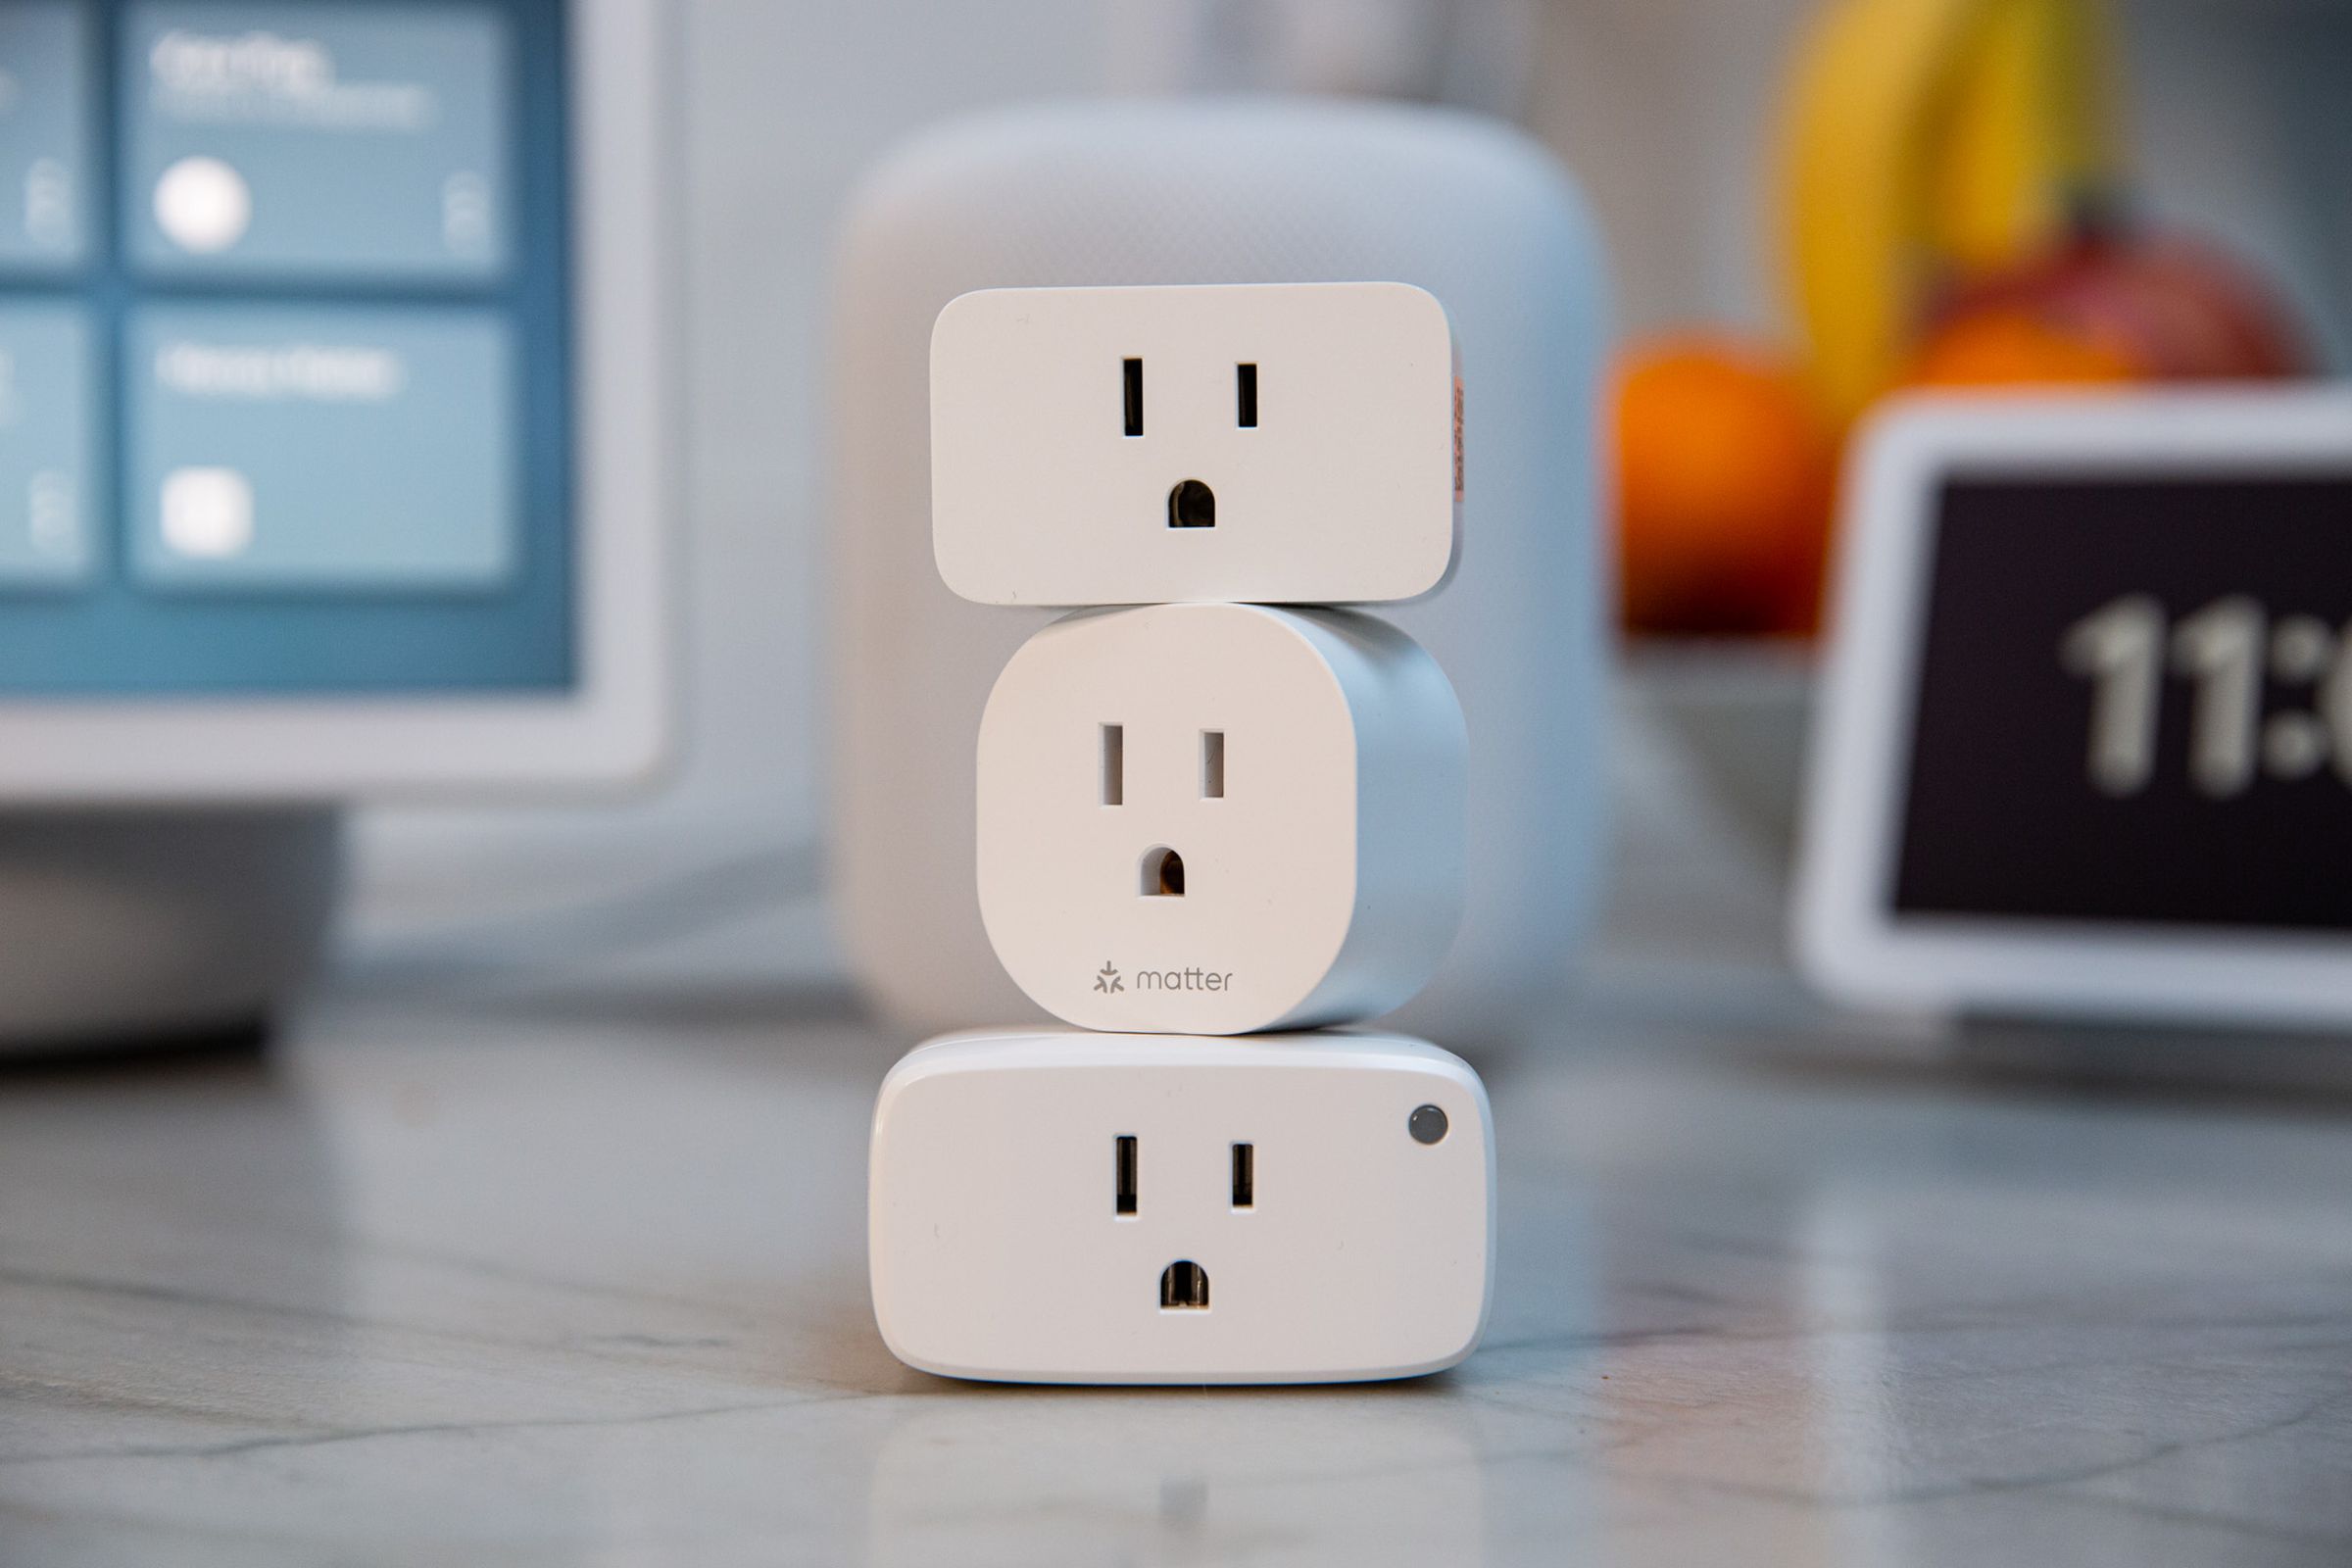 The Tapo, Meross, and Eve smart plugs are among the first devices to support Matter.